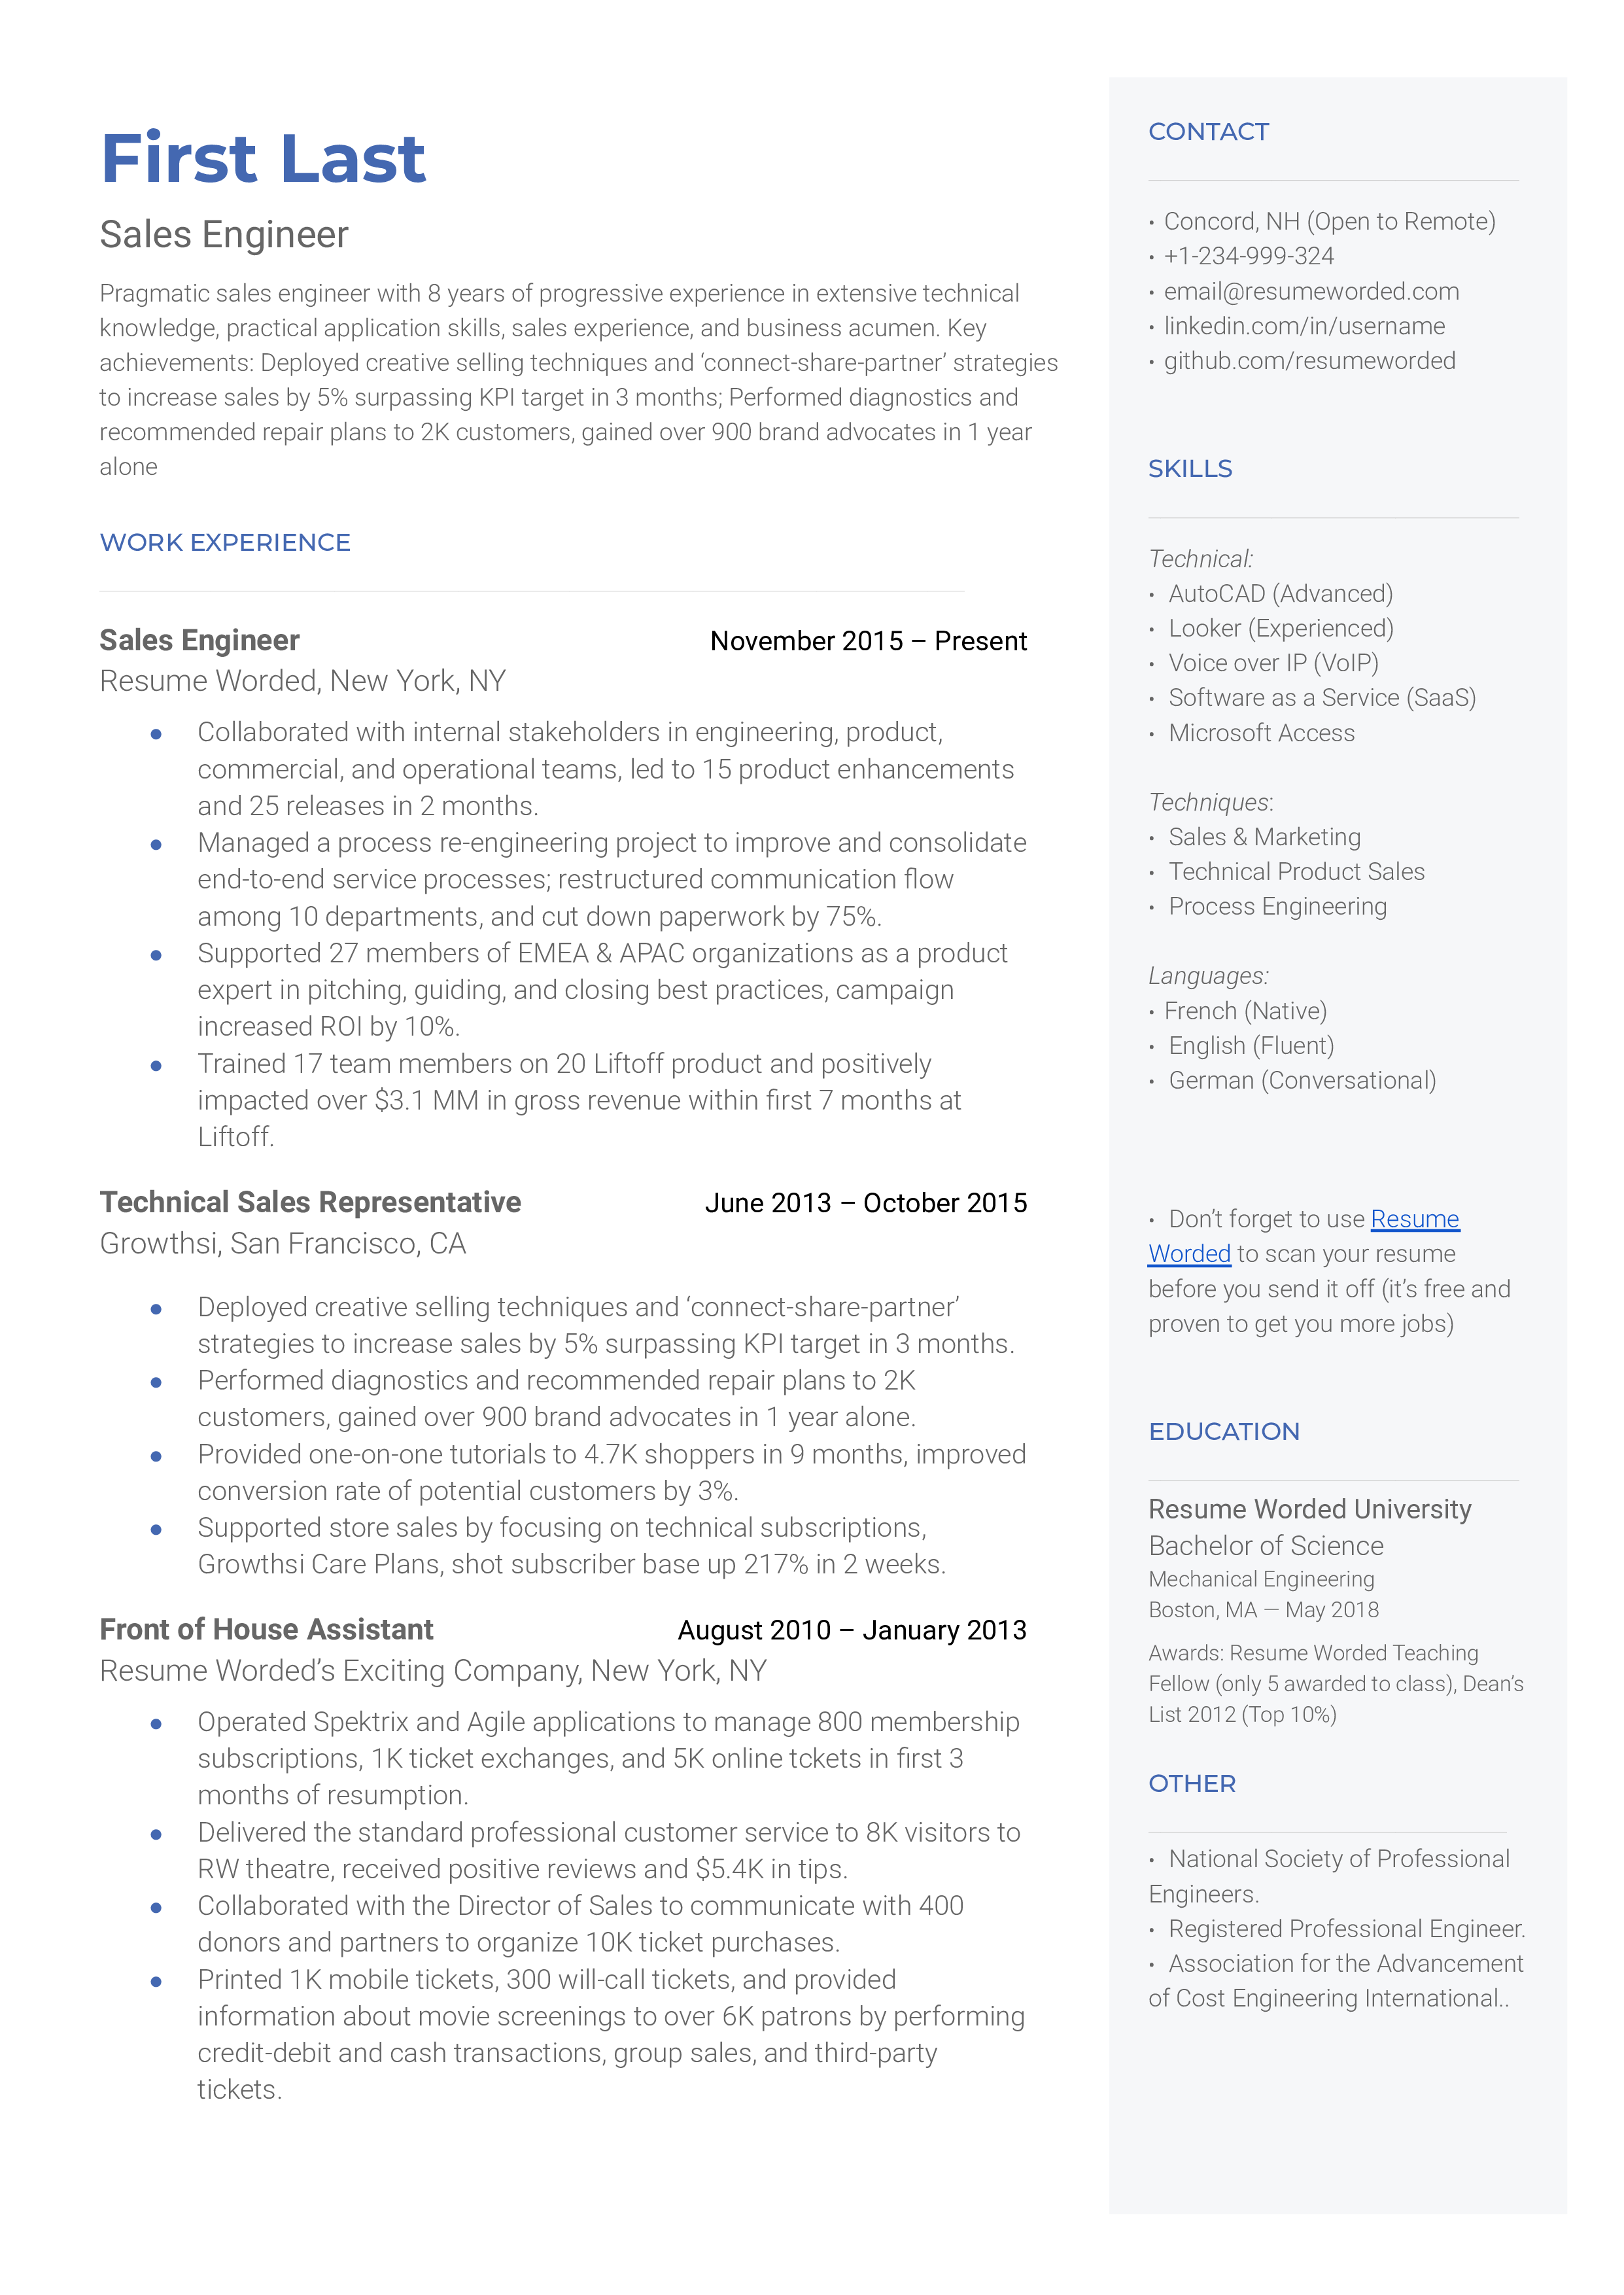 CV screenshot showcasing technical and sales skills for a Sales Engineer role.